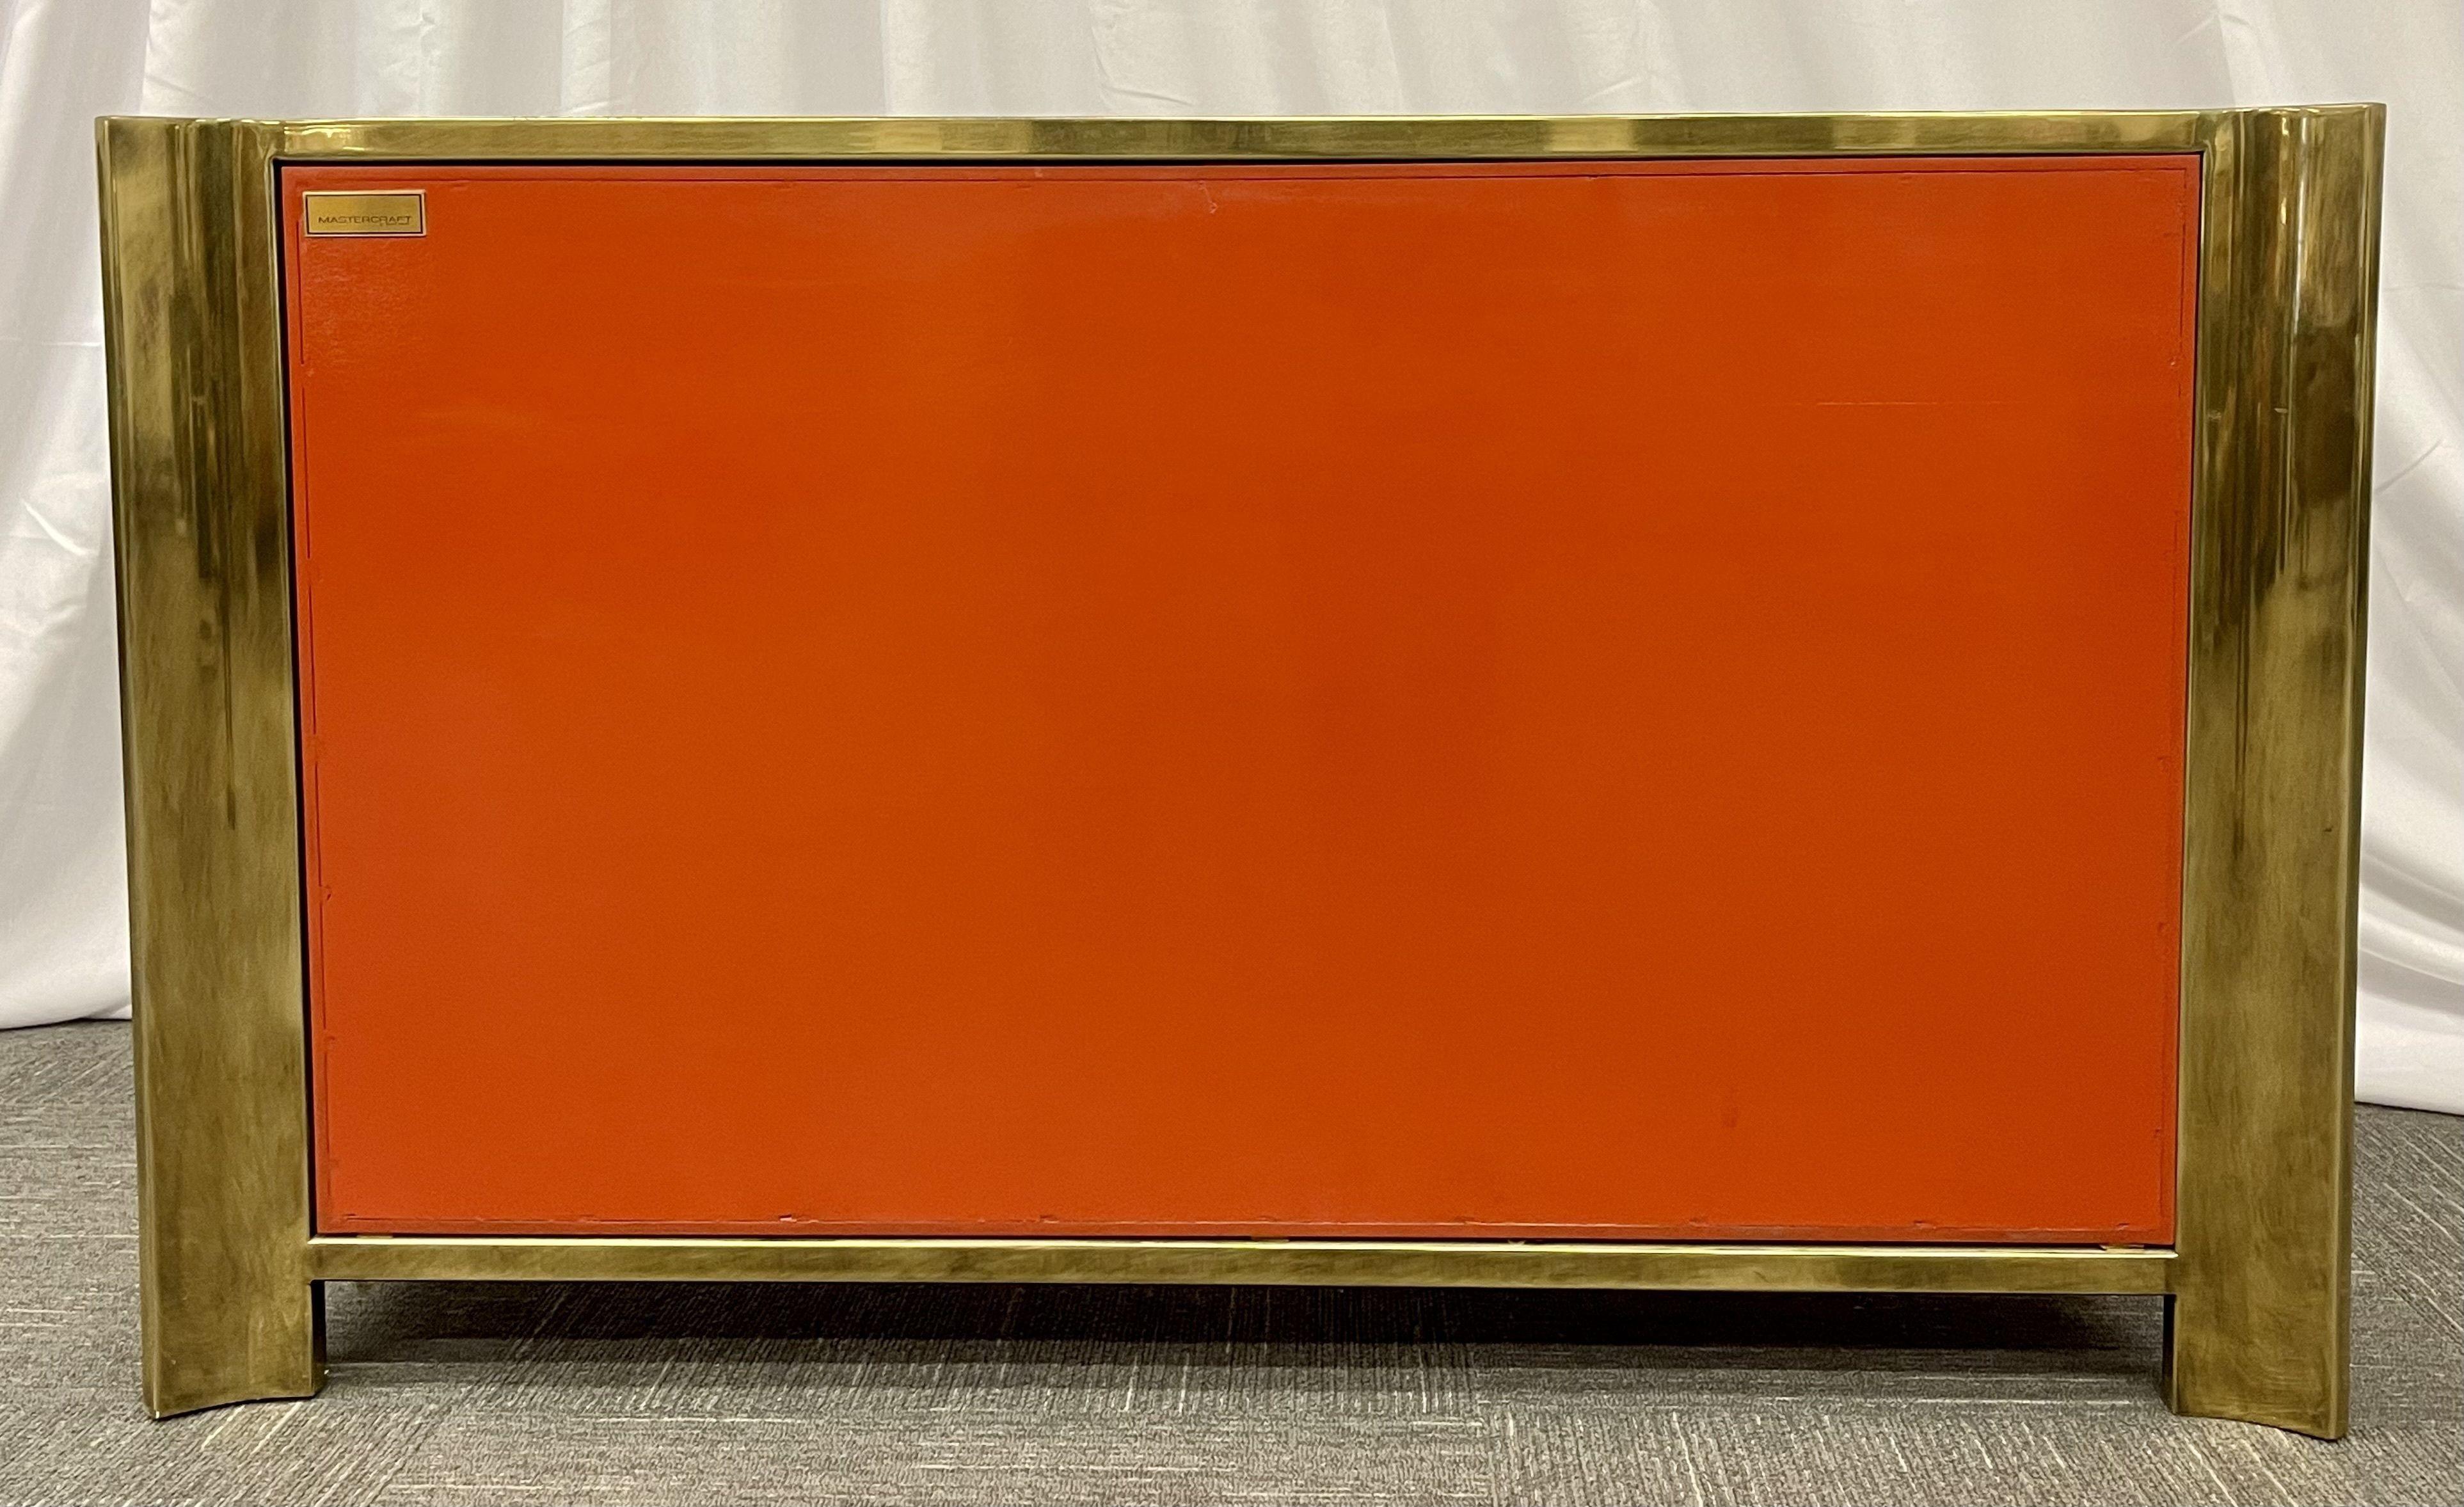 Mid-Century Modern Small Cabinet by Mastercraft, Lacquer, Brass, American, 1980s For Sale 11